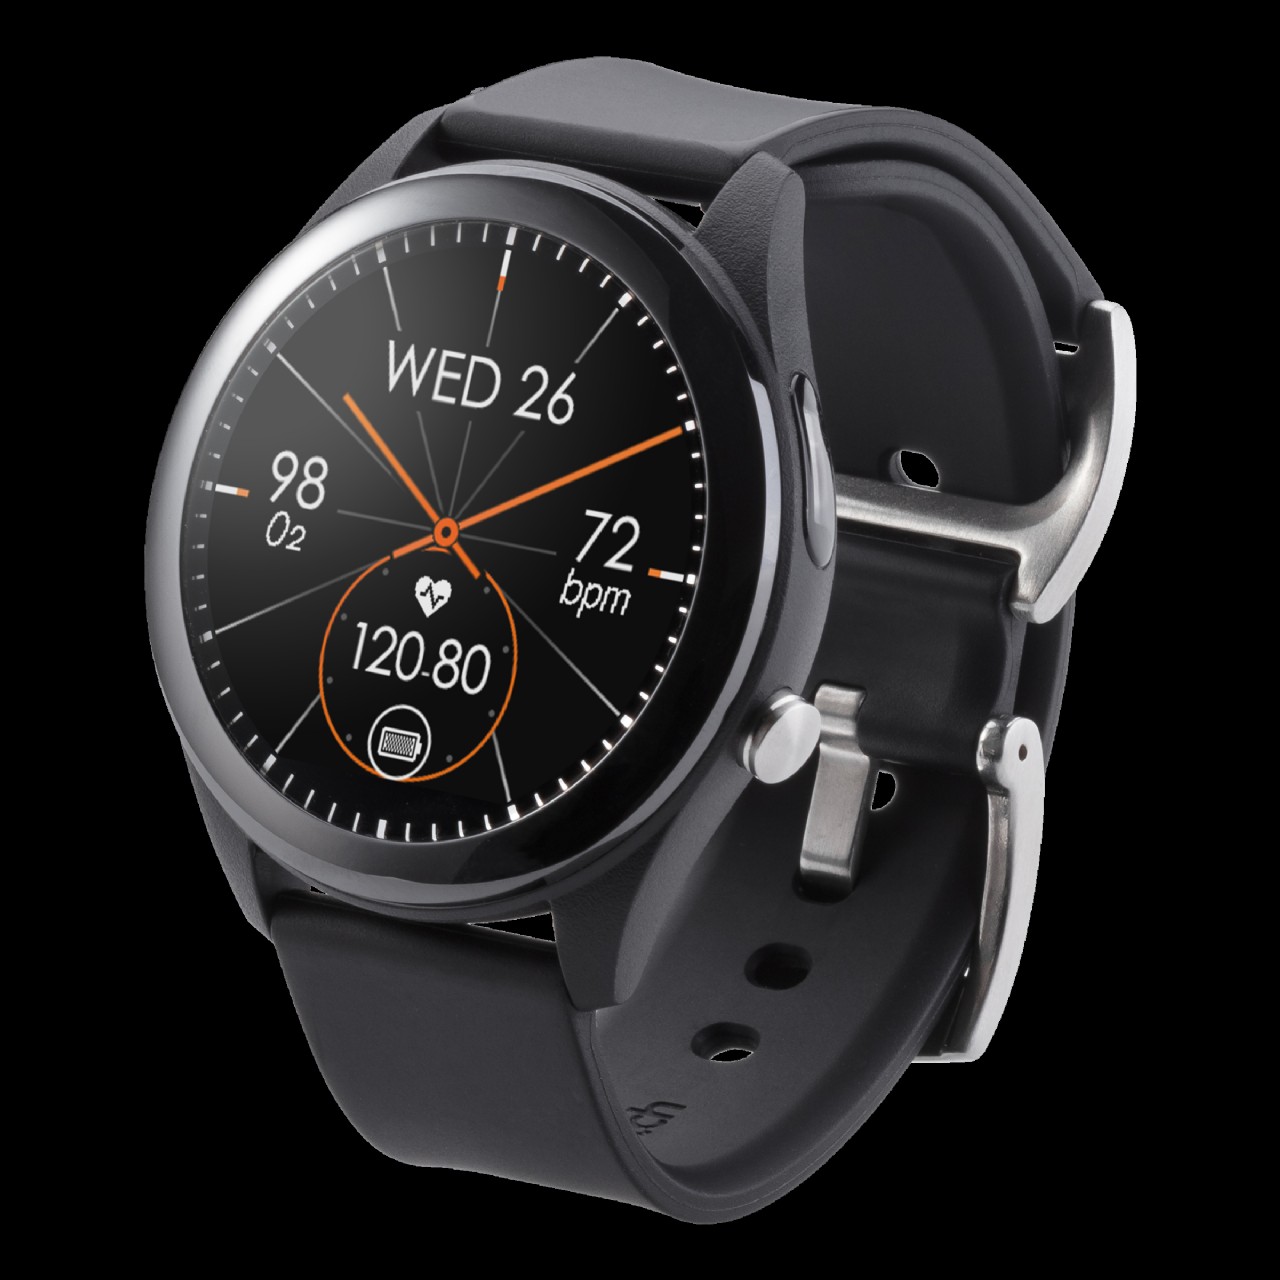 Asus VivoWatch has a battery life